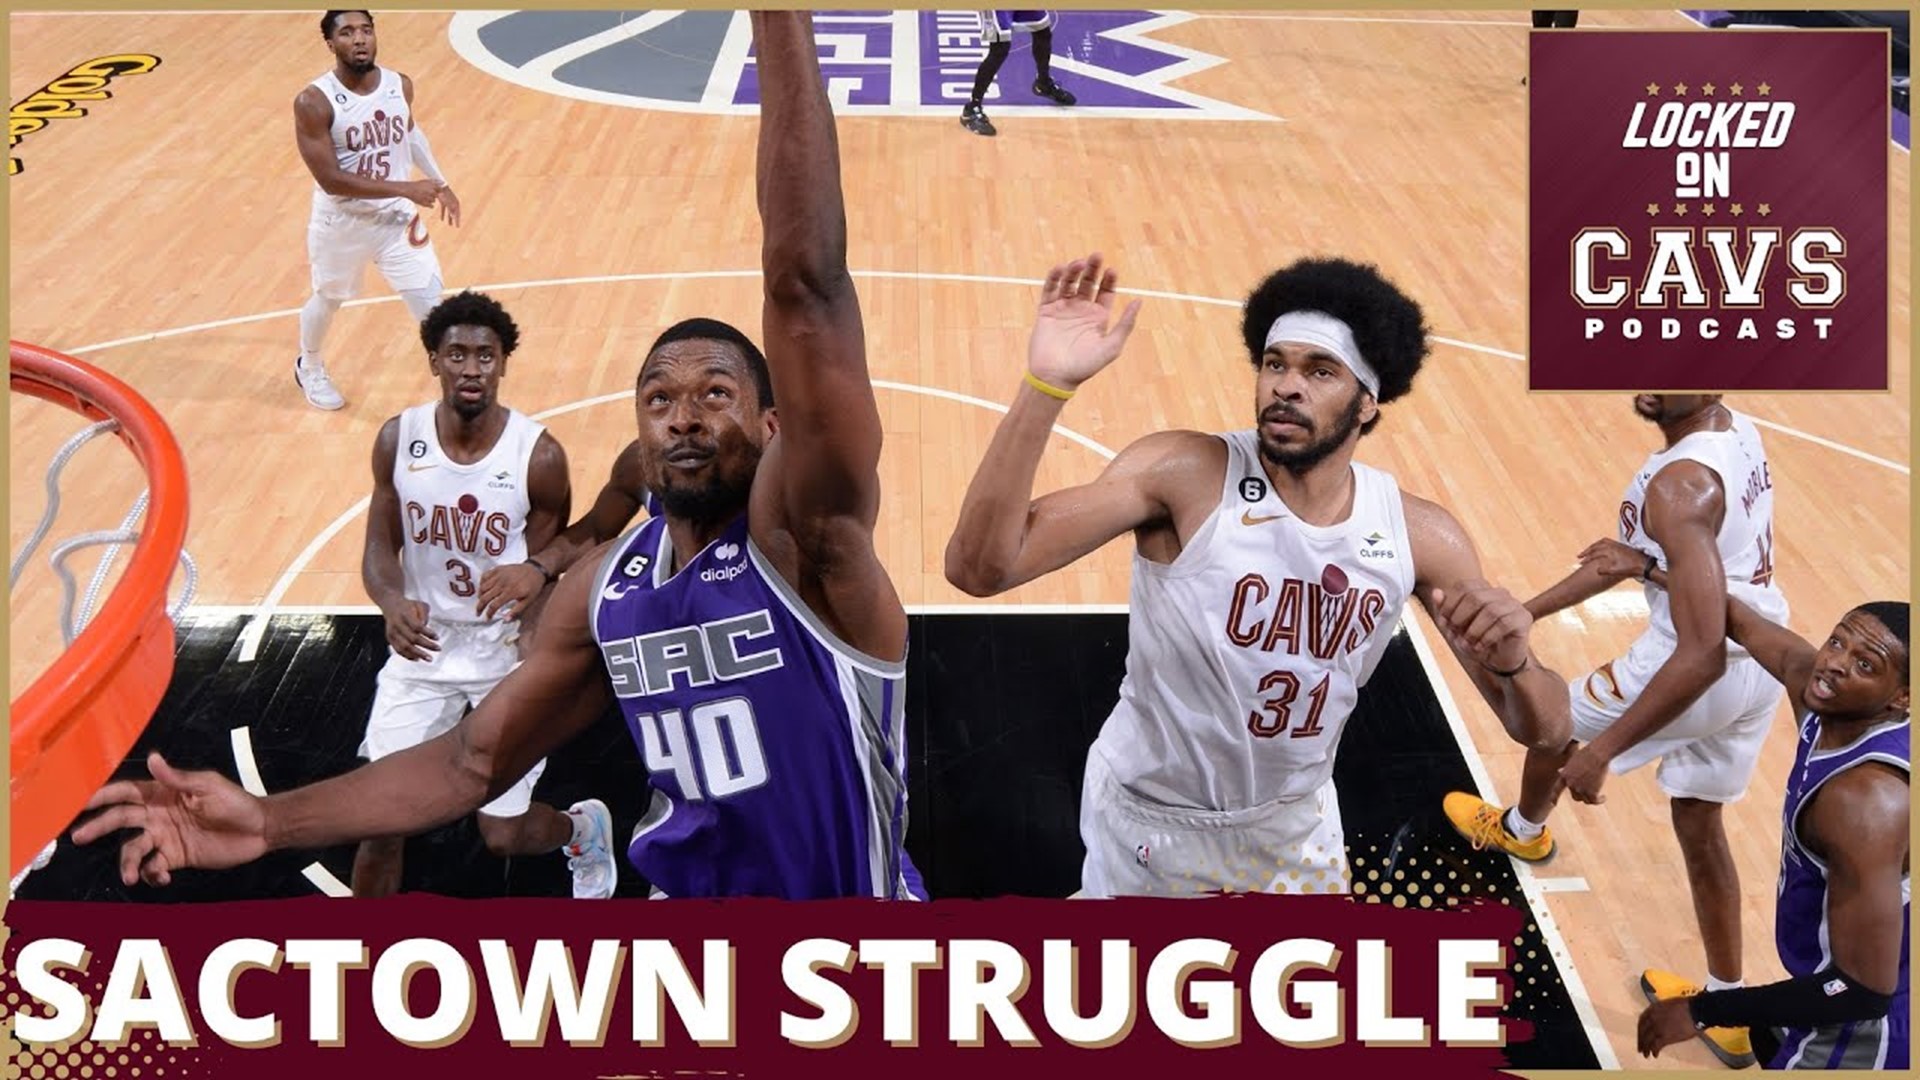 Chris Manning and Evan Dammarell talk about how the Cavs lost a tight game in Sacramento and rank the plays offensively.